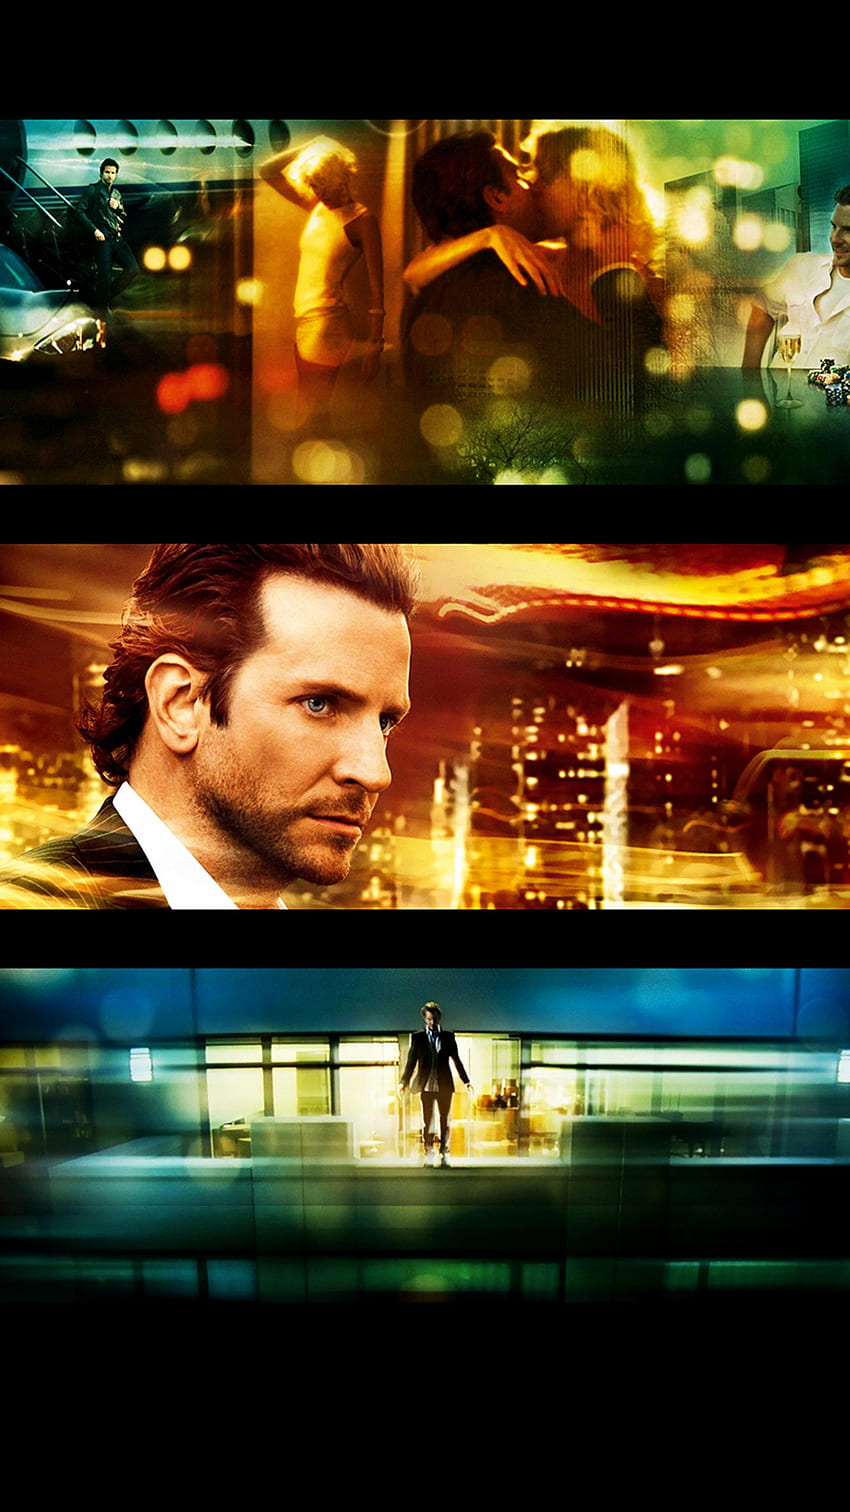 Limitless TV Show 1080P 2K 4K 5K HD wallpapers free download   Wallpaper Flare